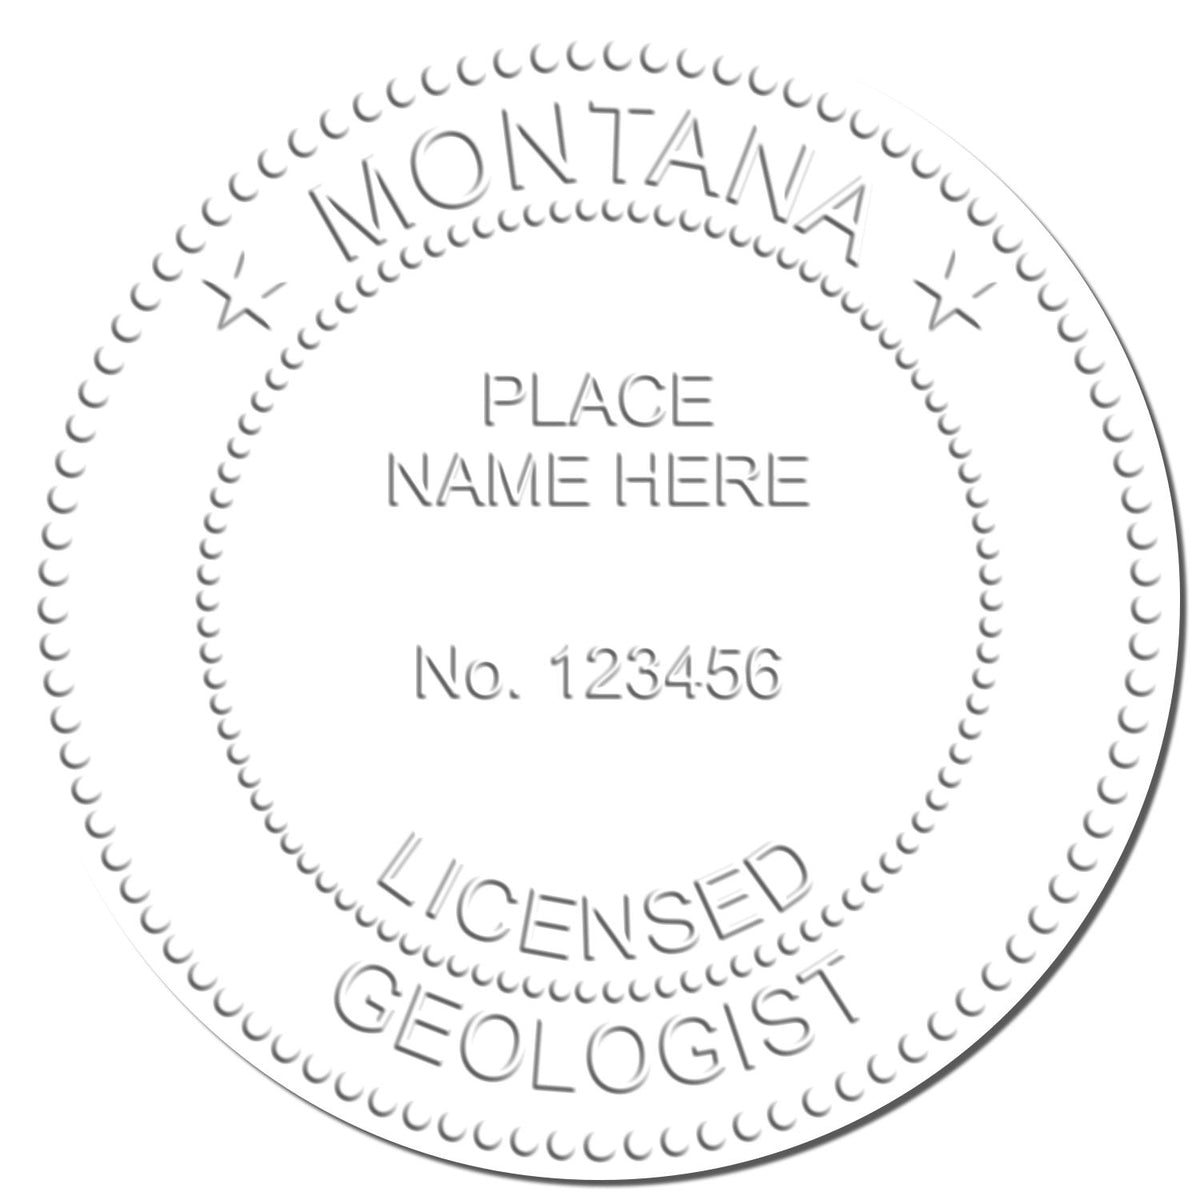 A stamped imprint of the Long Reach Montana Geology Seal in this stylish lifestyle photo, setting the tone for a unique and personalized product.